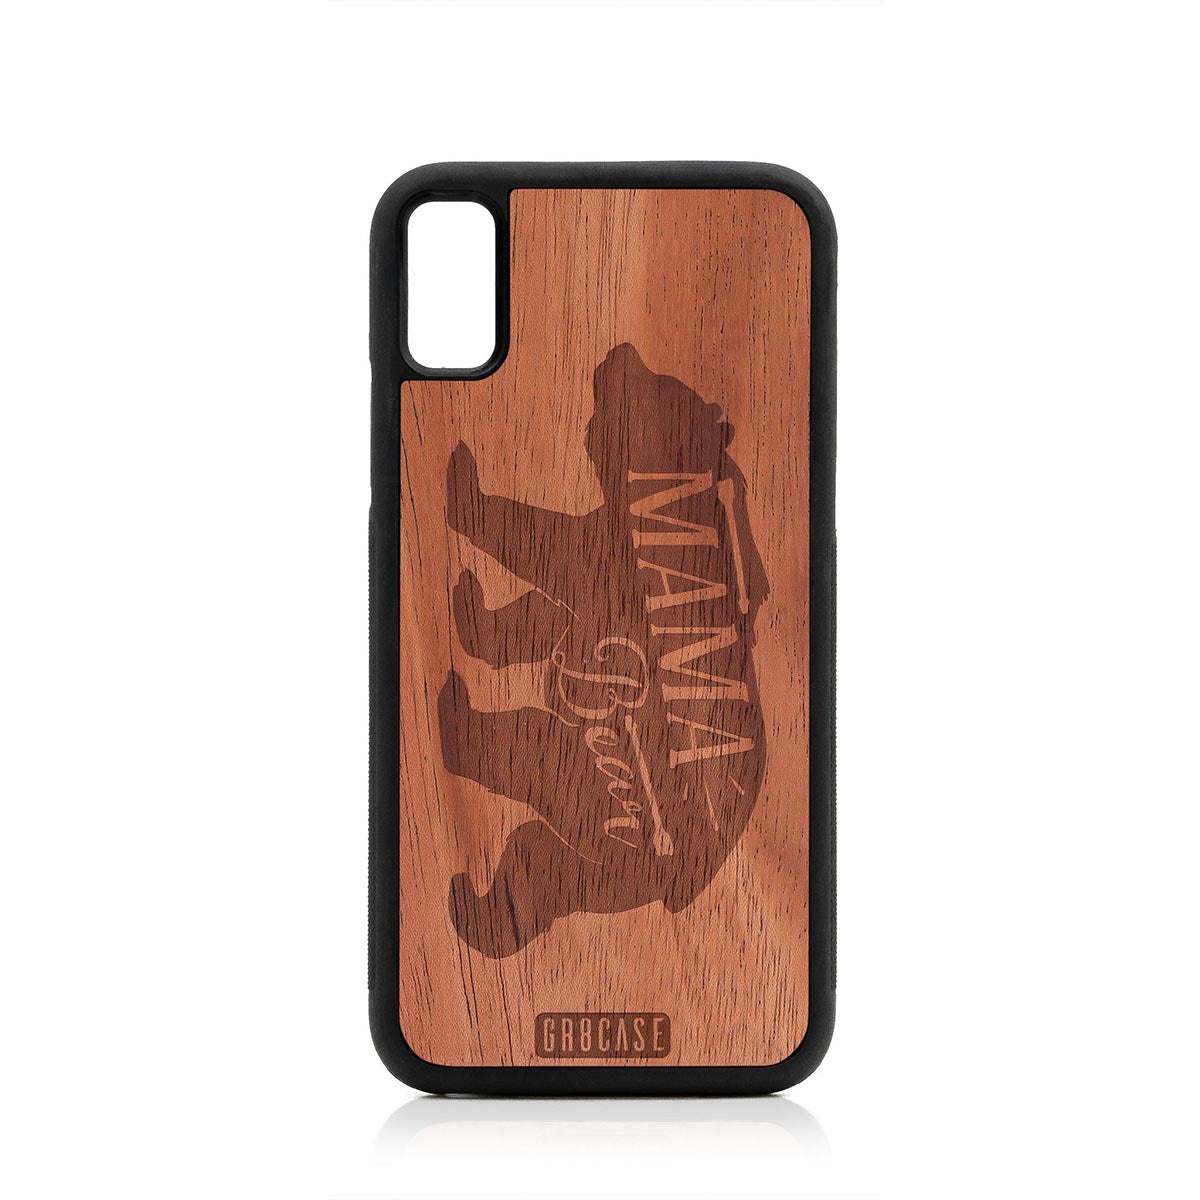 Mama Bear Design Wood Case For iPhone XS Max by GR8CASE